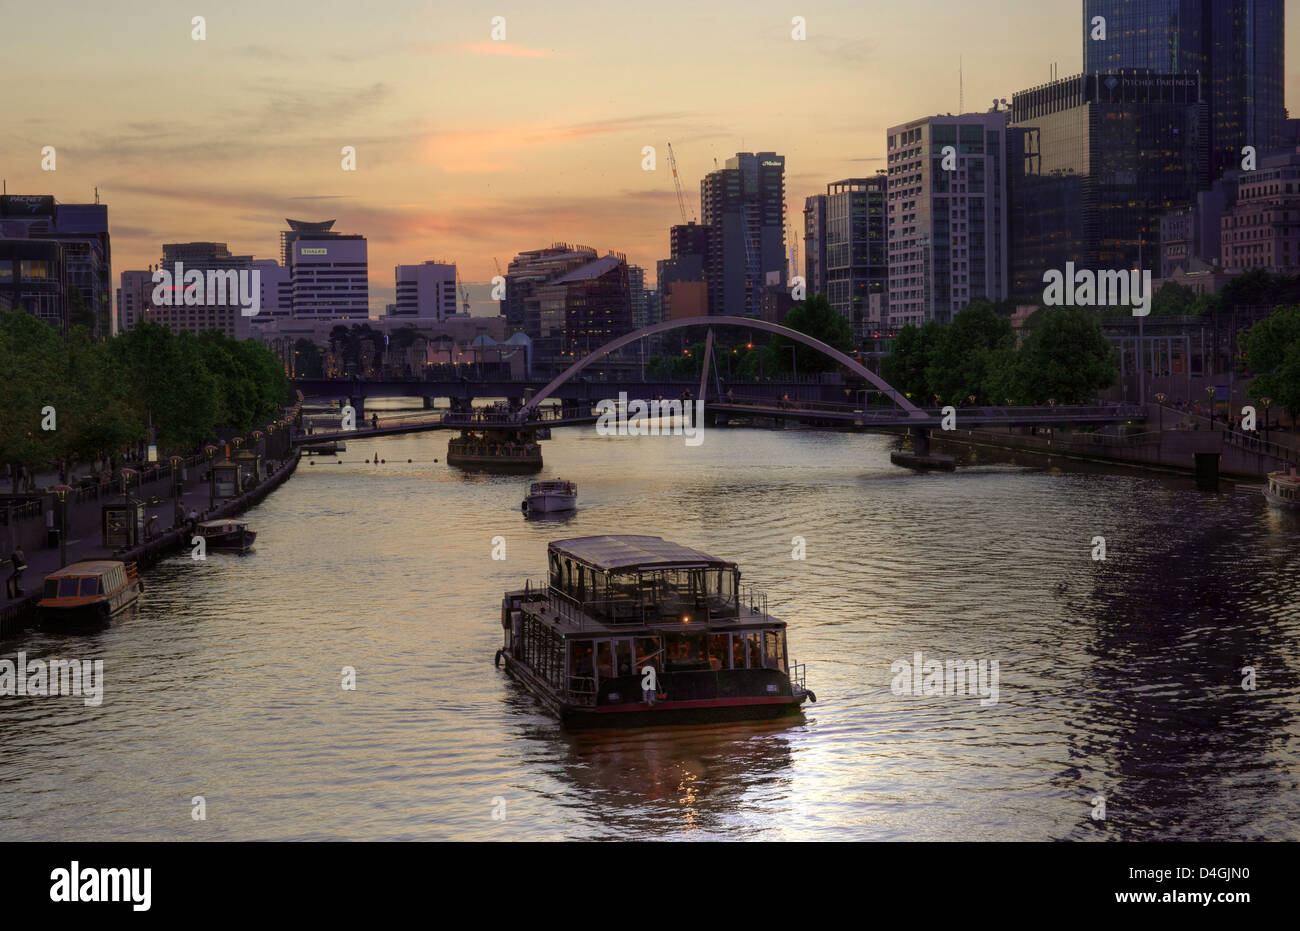 Yarra River in Melbourne at Sunset Stock Photo